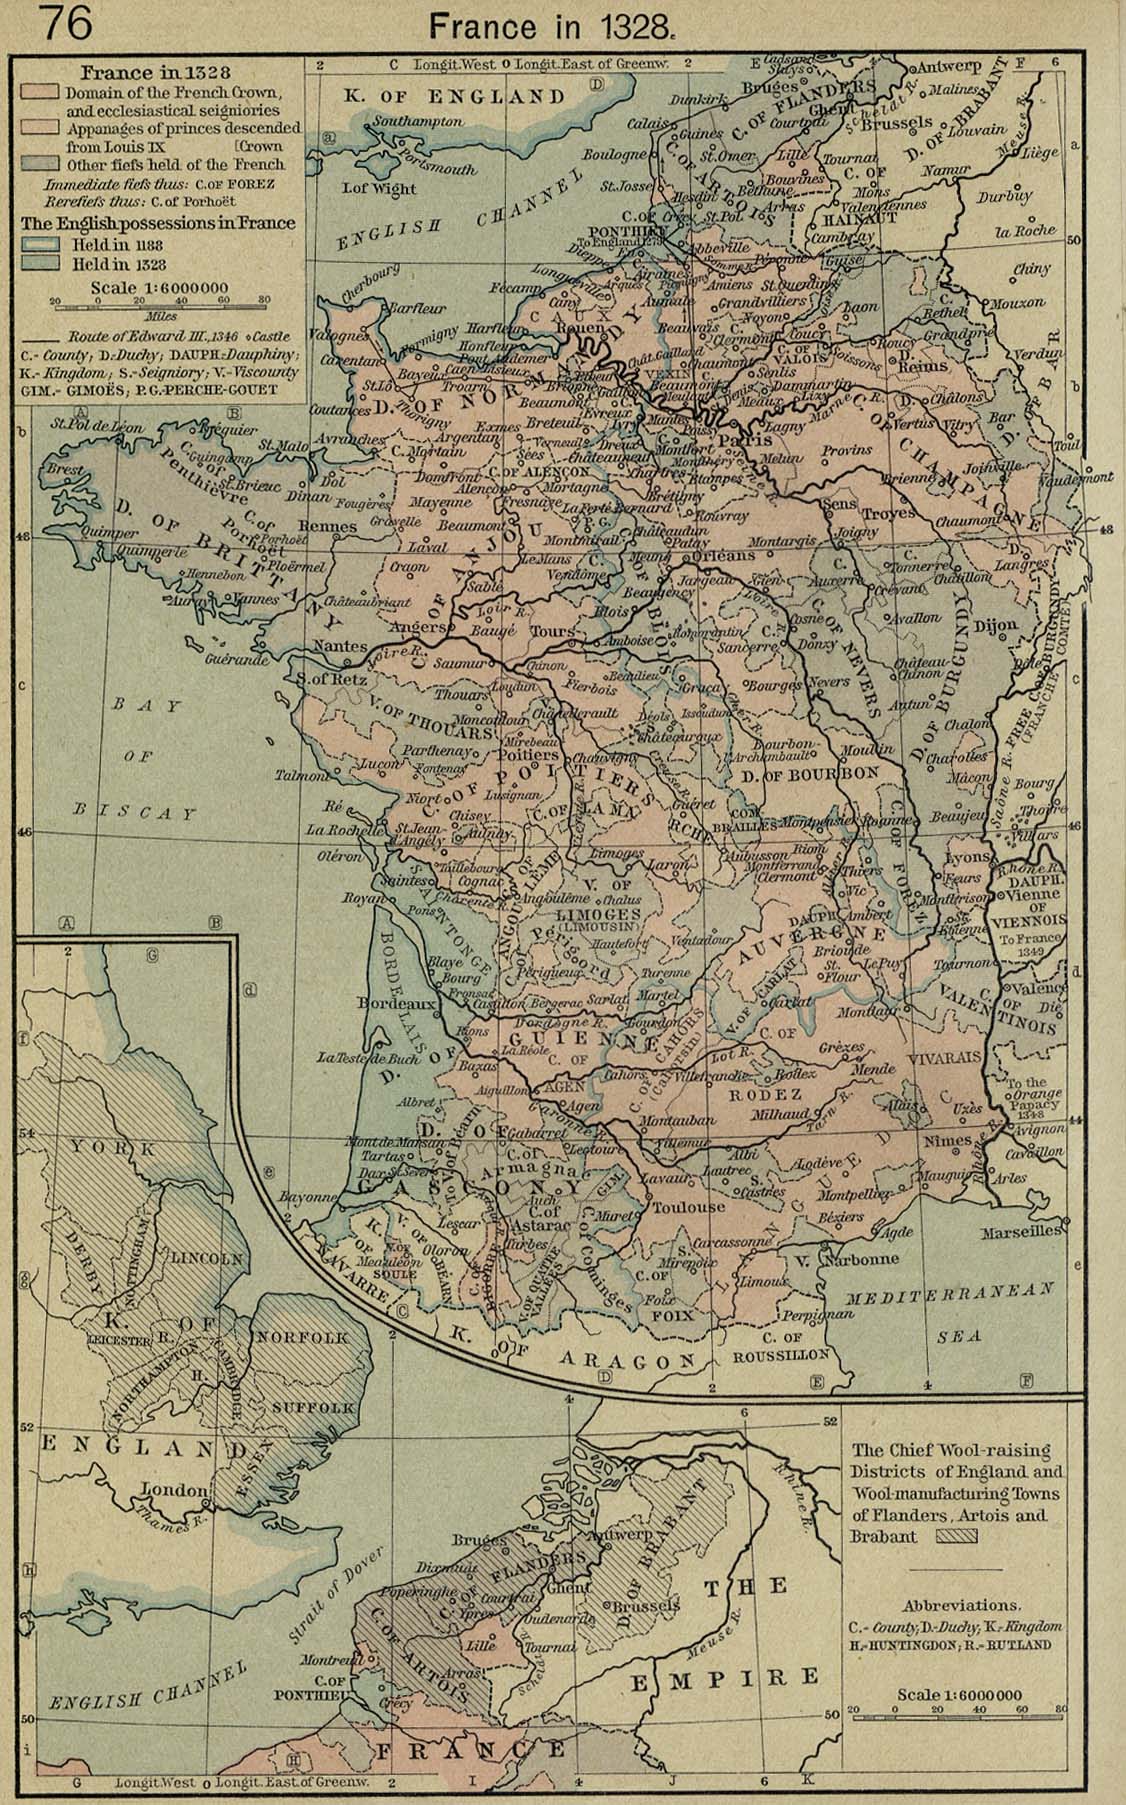 Map of France 1328